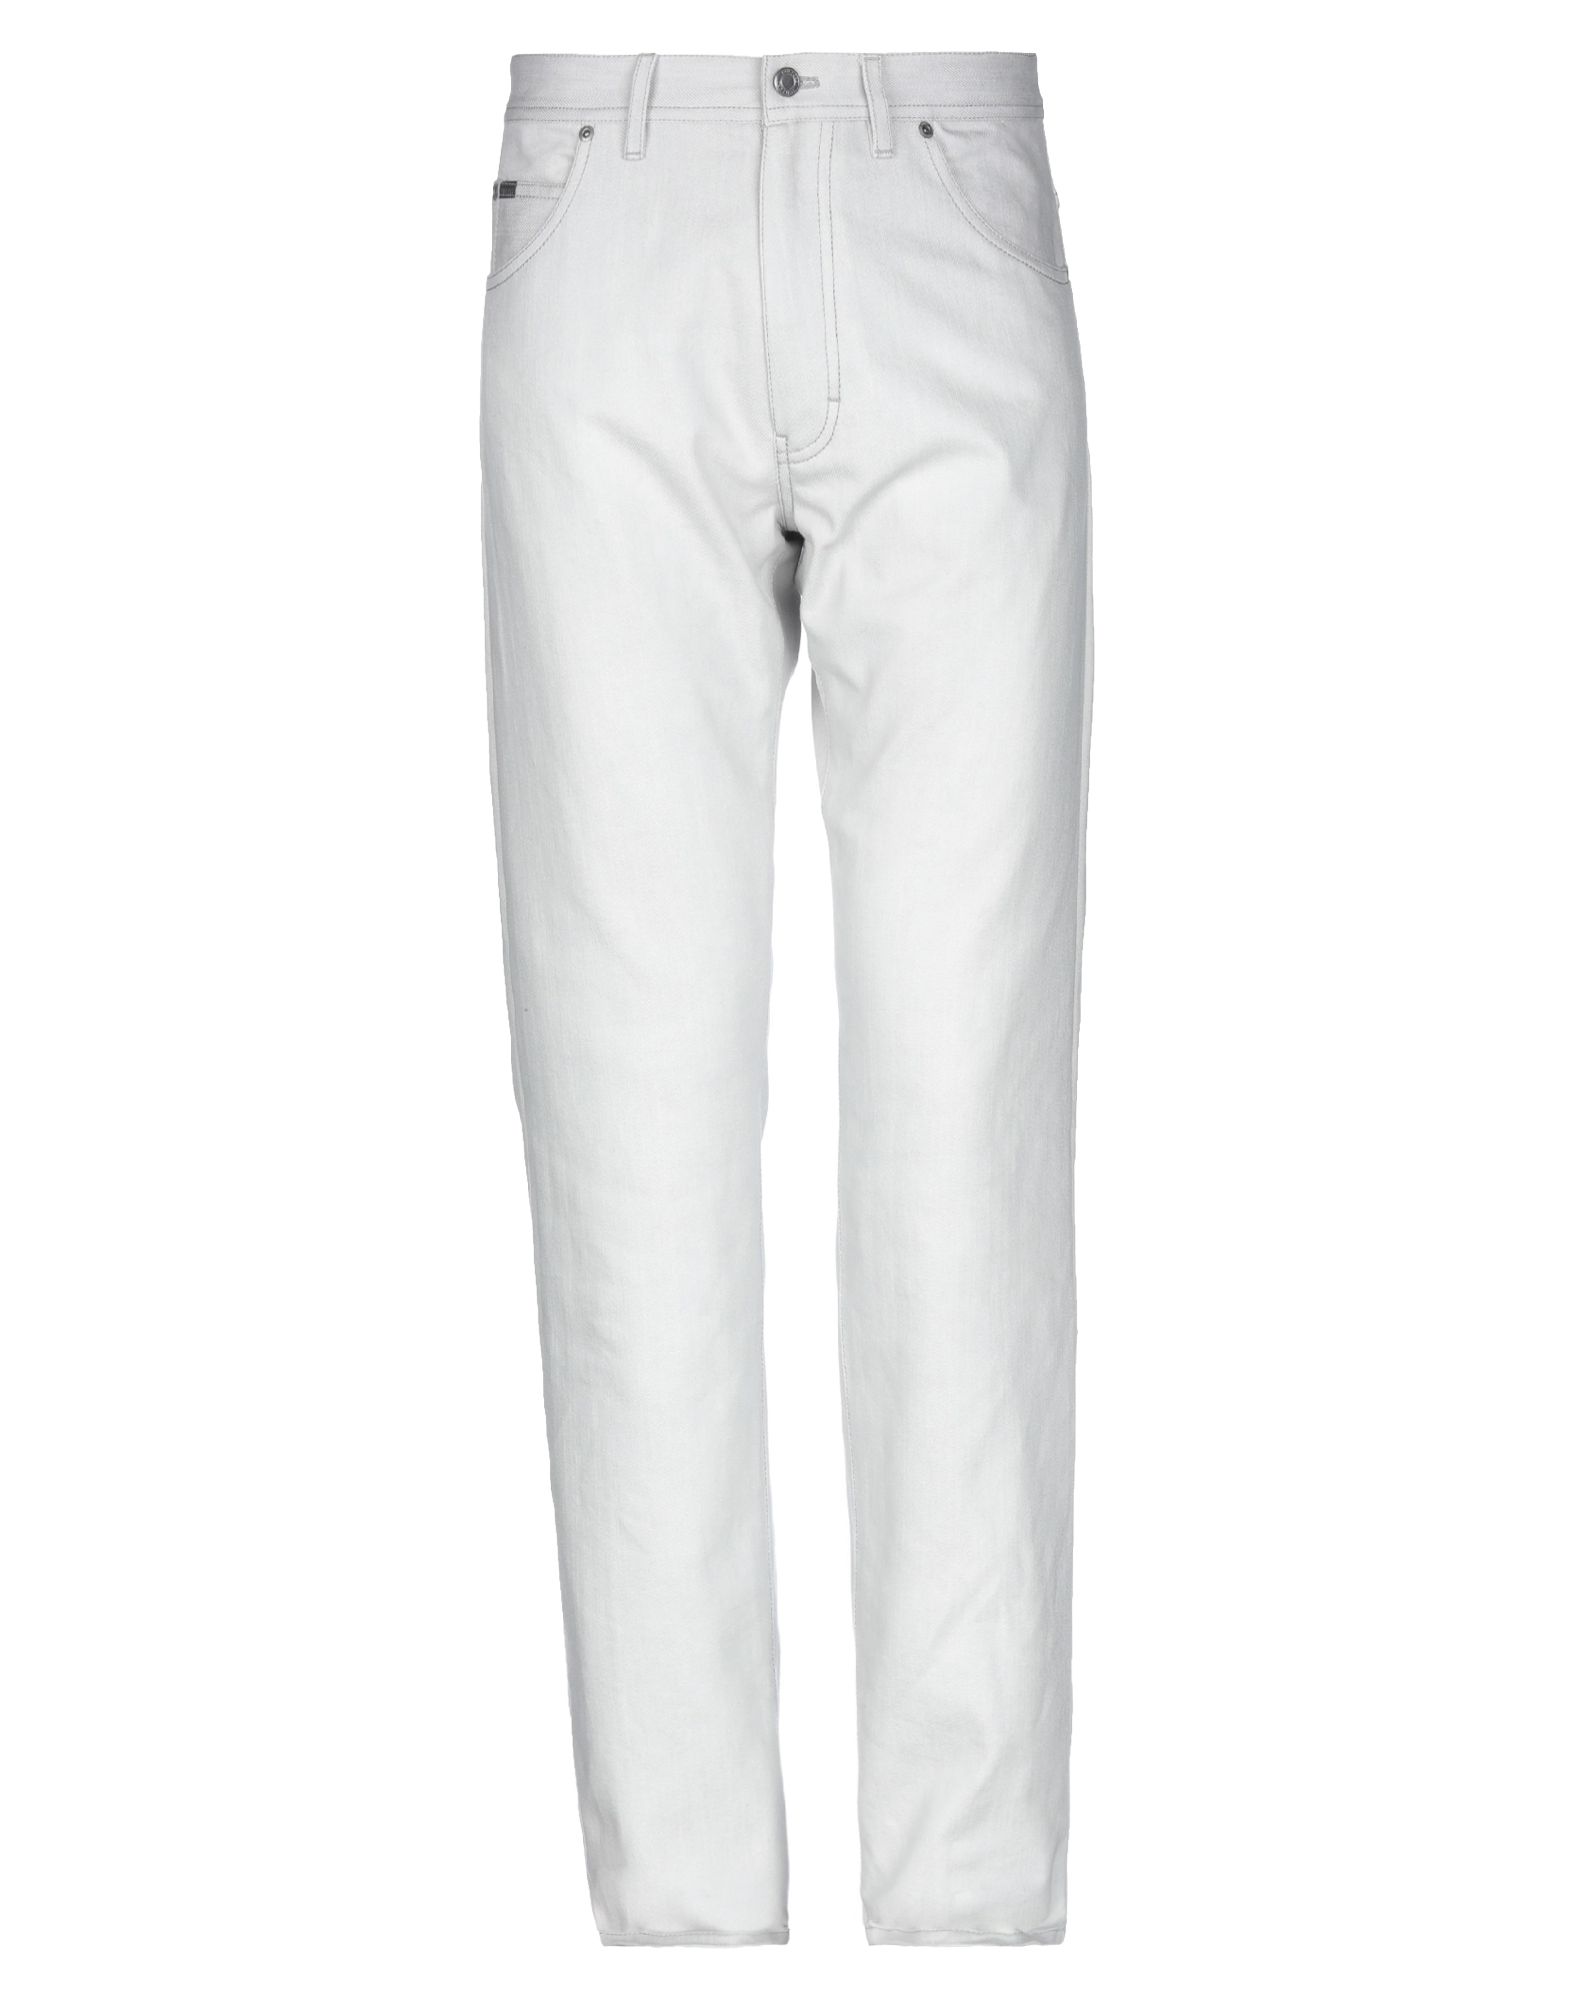 TOM FORD JEANS,42816113PA 4